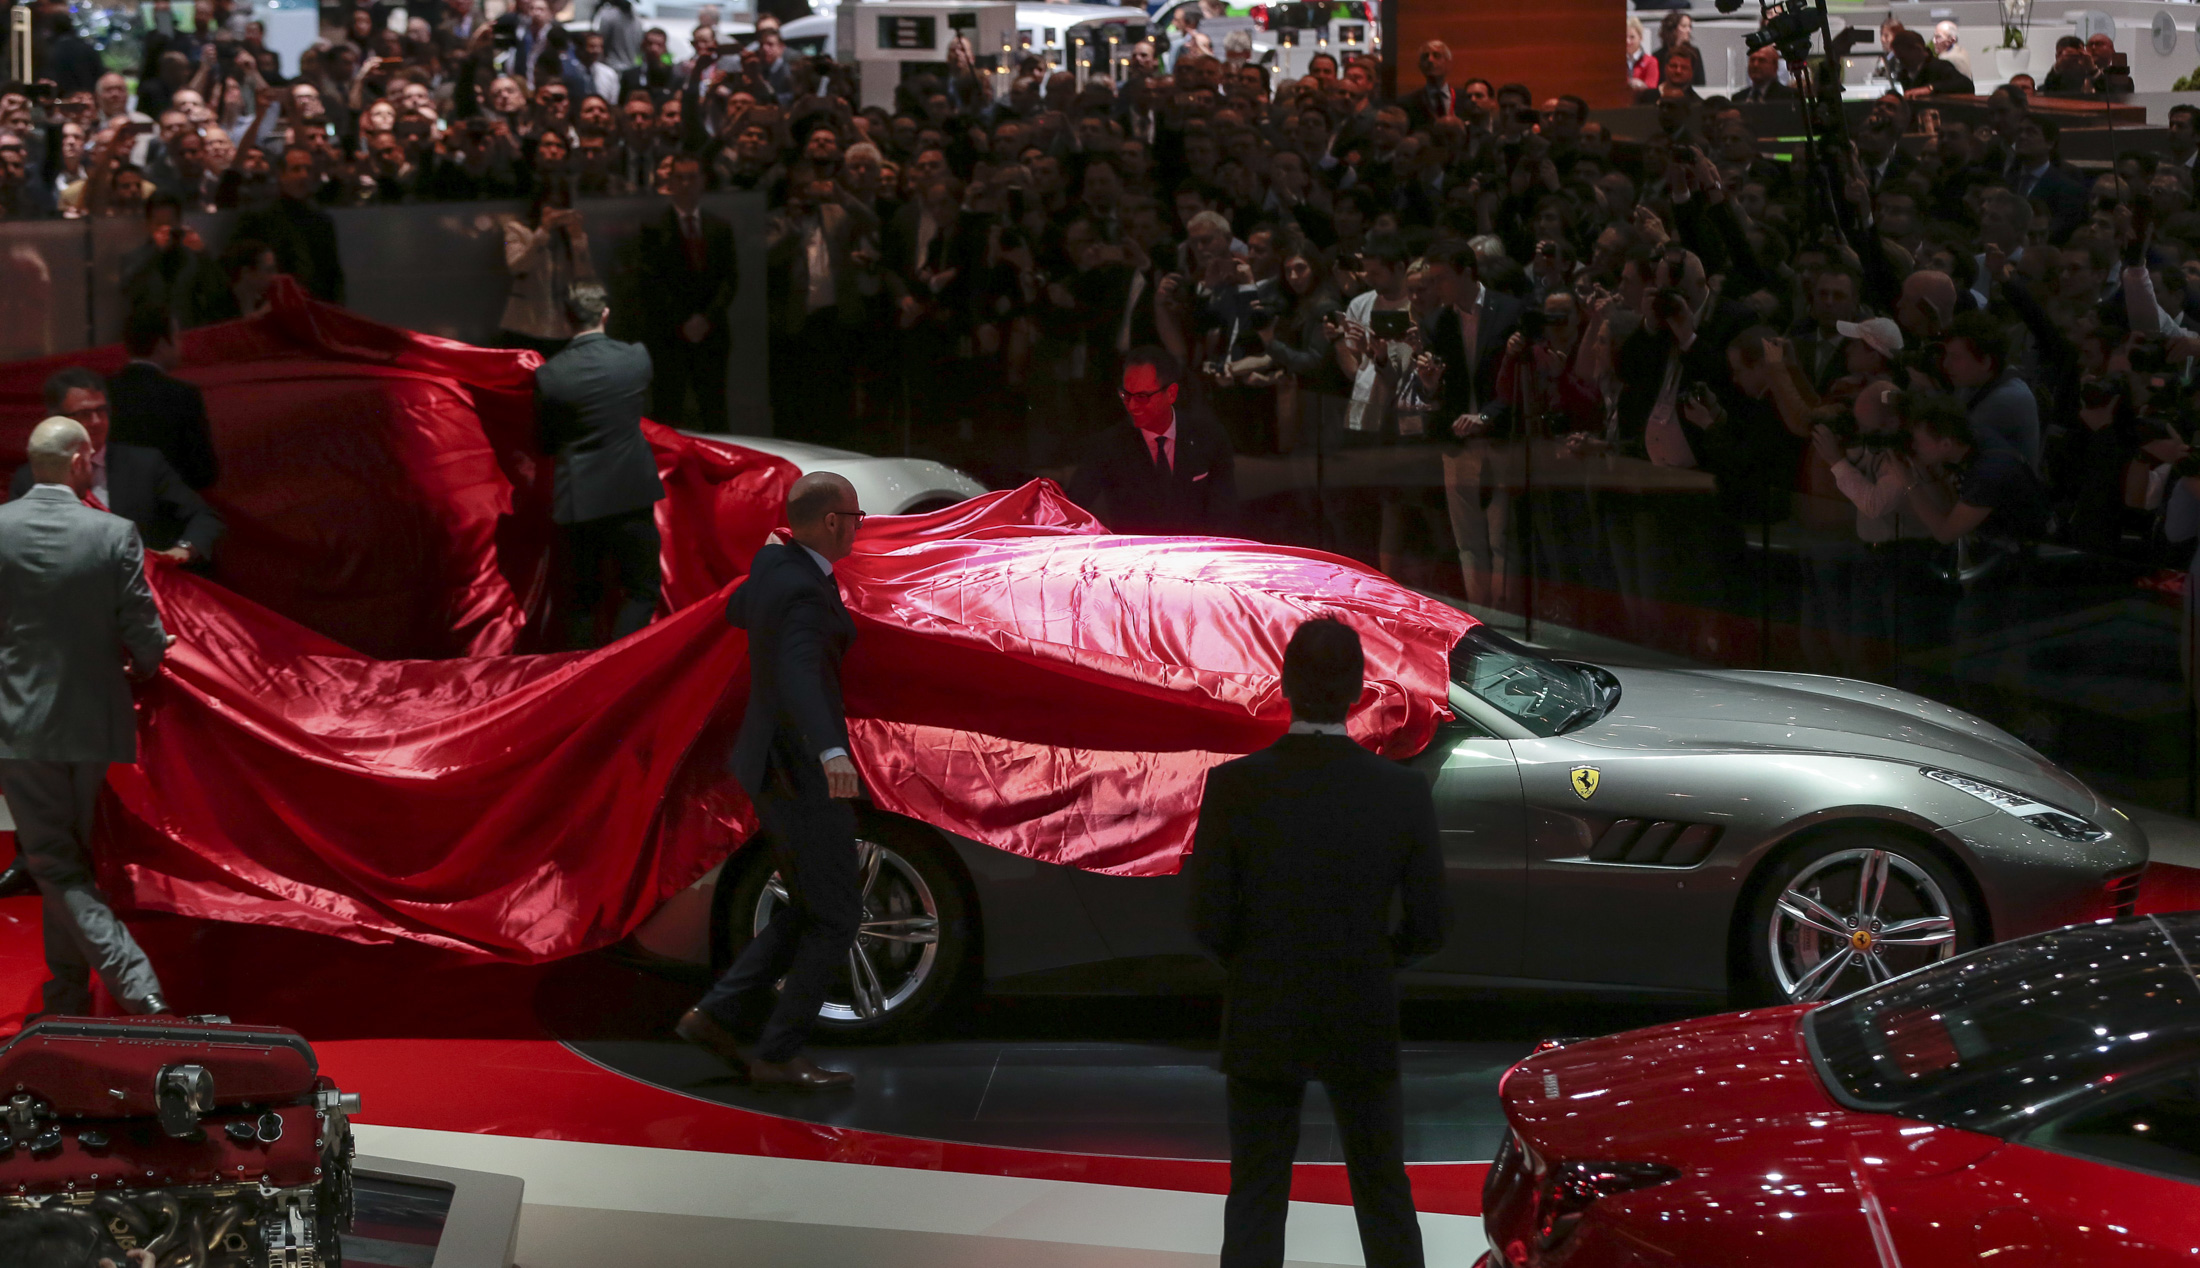 Workers remove the covers from a Ferrari GTC4 Lusso automobile, produced by Ferrari SpA, on the first day of the 86th Geneva International Motor Show in Geneva, Switzerland on Tuesday, March 1, 2016. The show opens to the public on March 3, and will showcase the latest models from the world's top automakers. Photographer: Jason Alden/Bloomberg